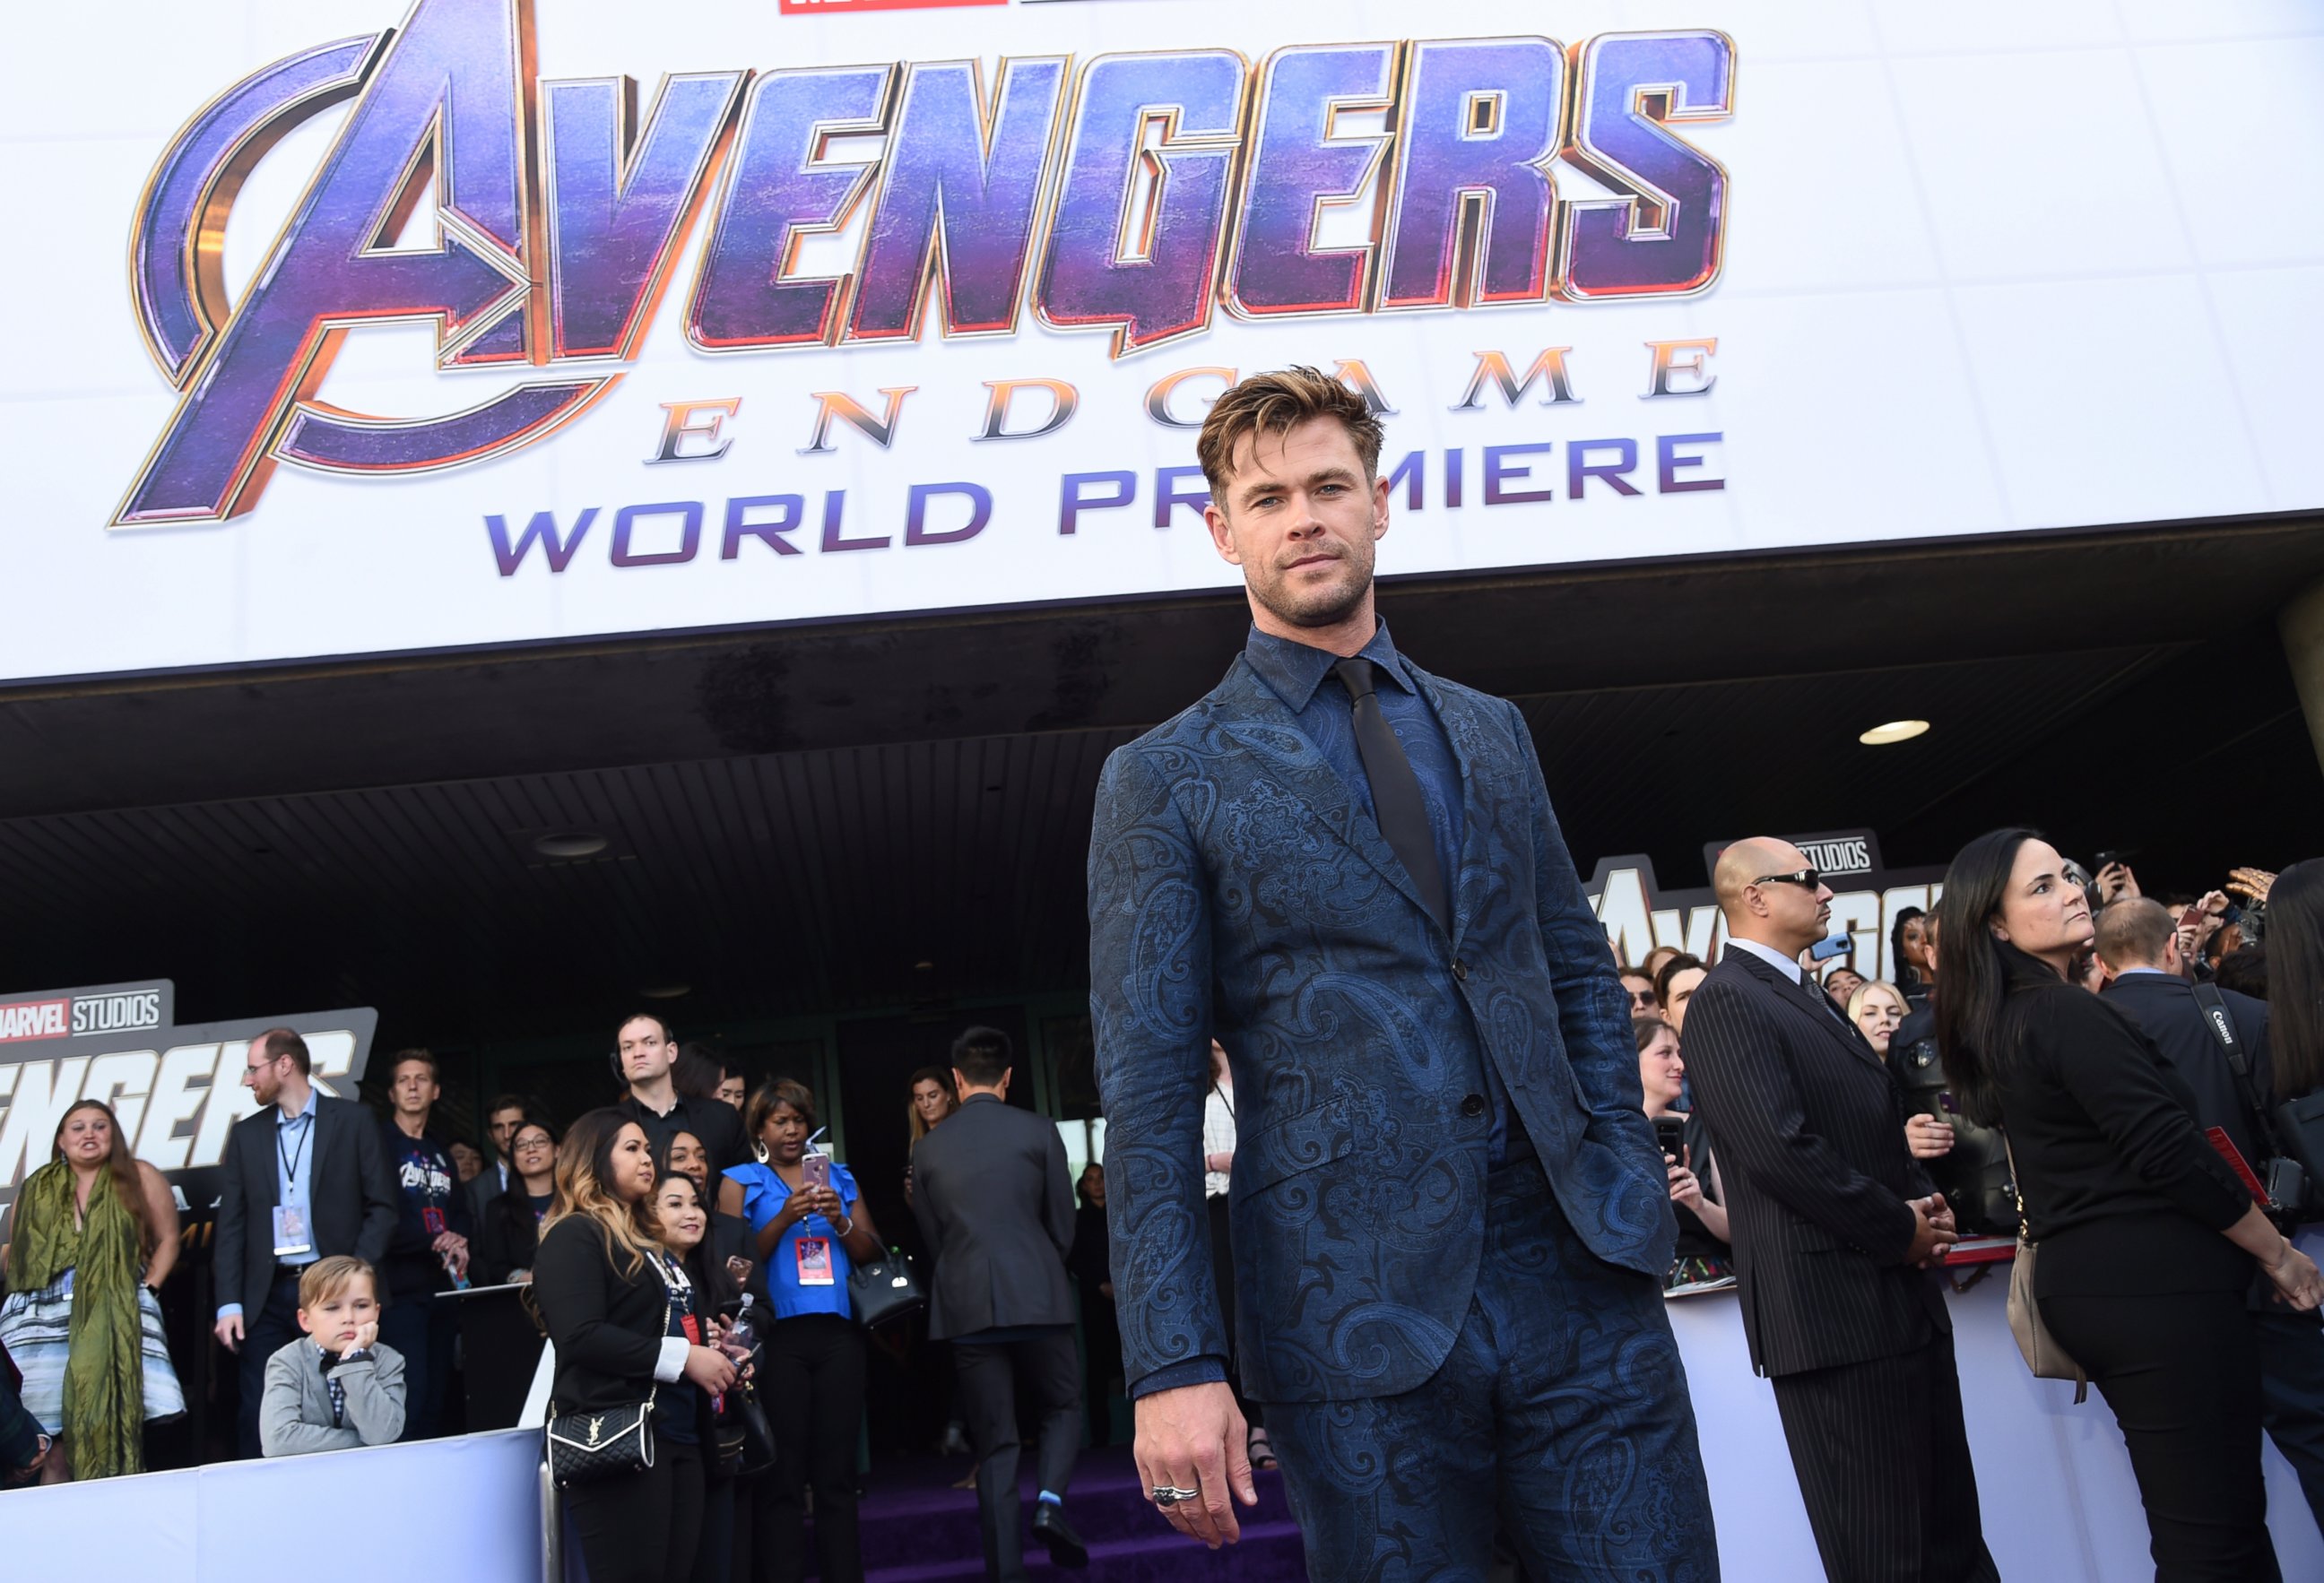 PHOTO: Chris Hemsworth arrives at the premiere of "Avengers: Endgame" at the Los Angeles Convention Center on Monday, April 22, 2019.